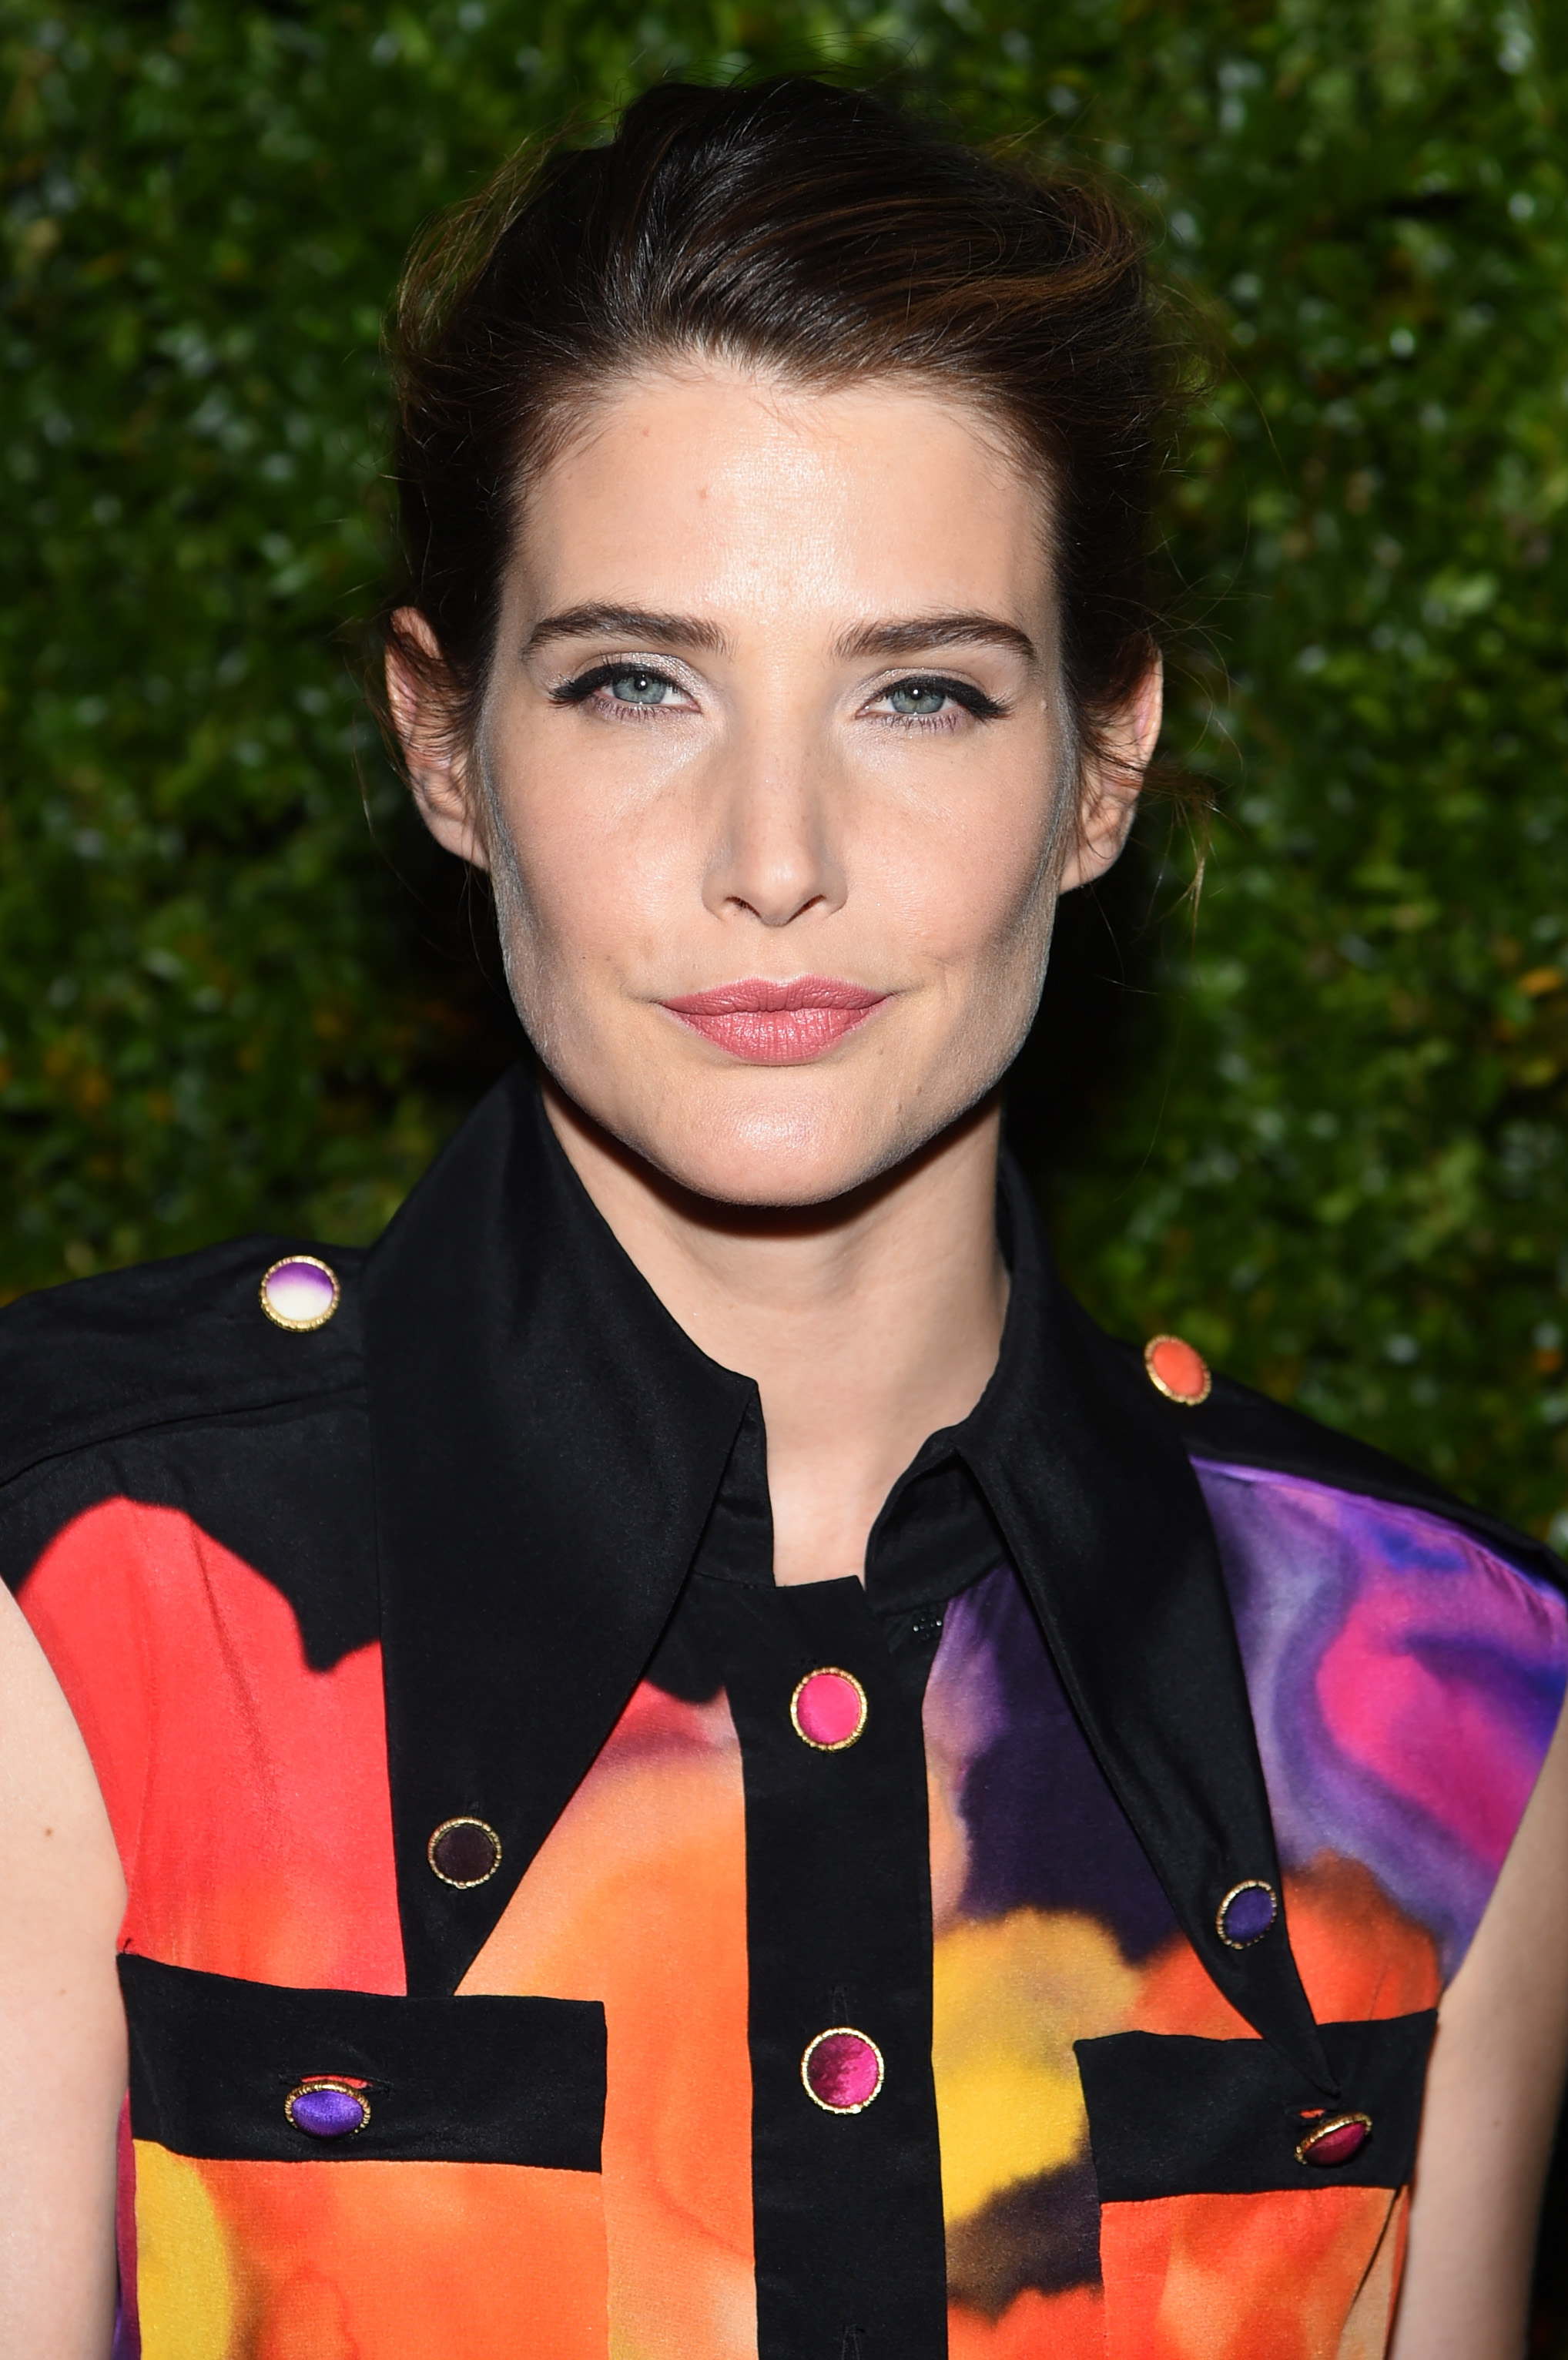 Cobie Smulders attends the Chanel Dinner during the 2015 Tribeca Film Festival at Balthazar on April 20, 2015 in New York City.